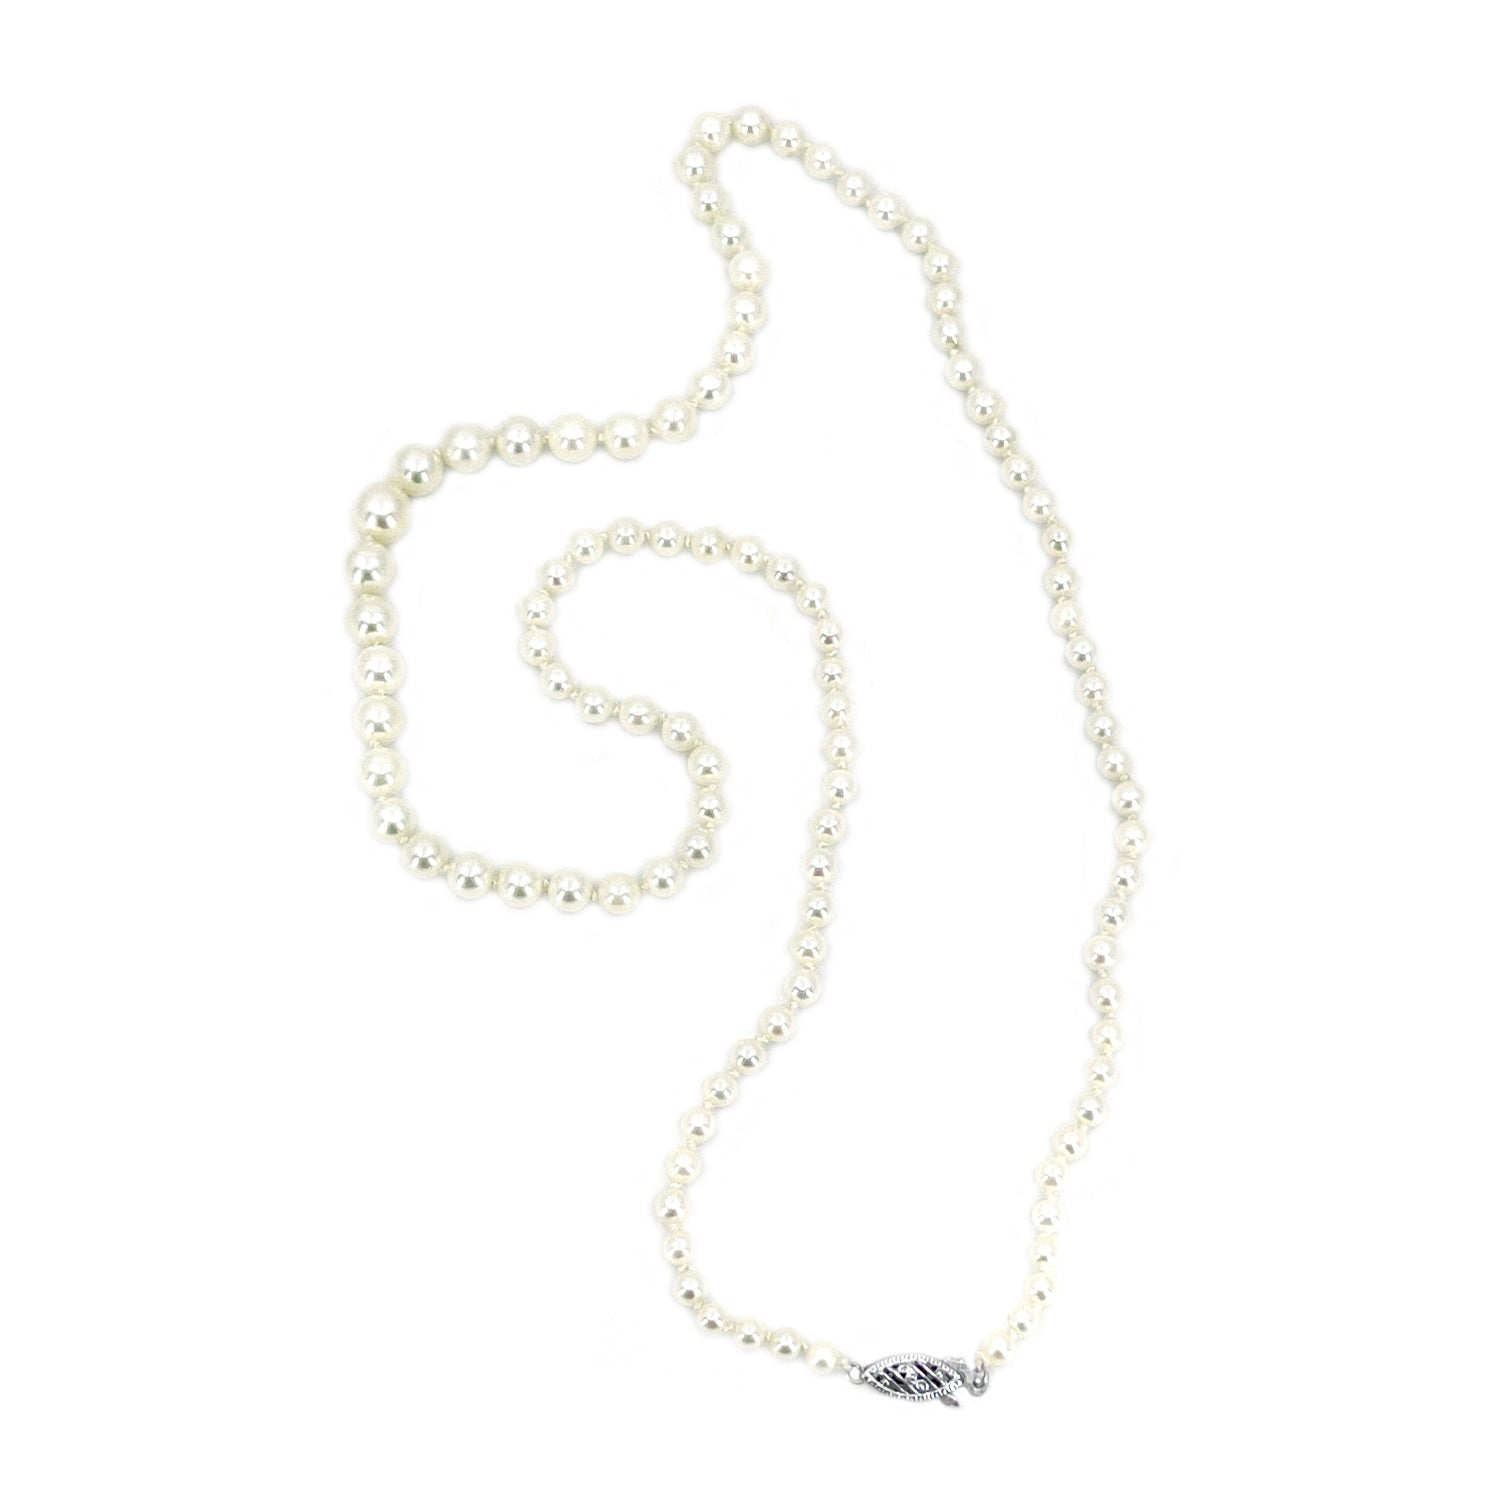 Vintage Japanese Saltwater Cultured Akoya Graduated Pearl Necklace - 10K White Gold 20.75 Inch